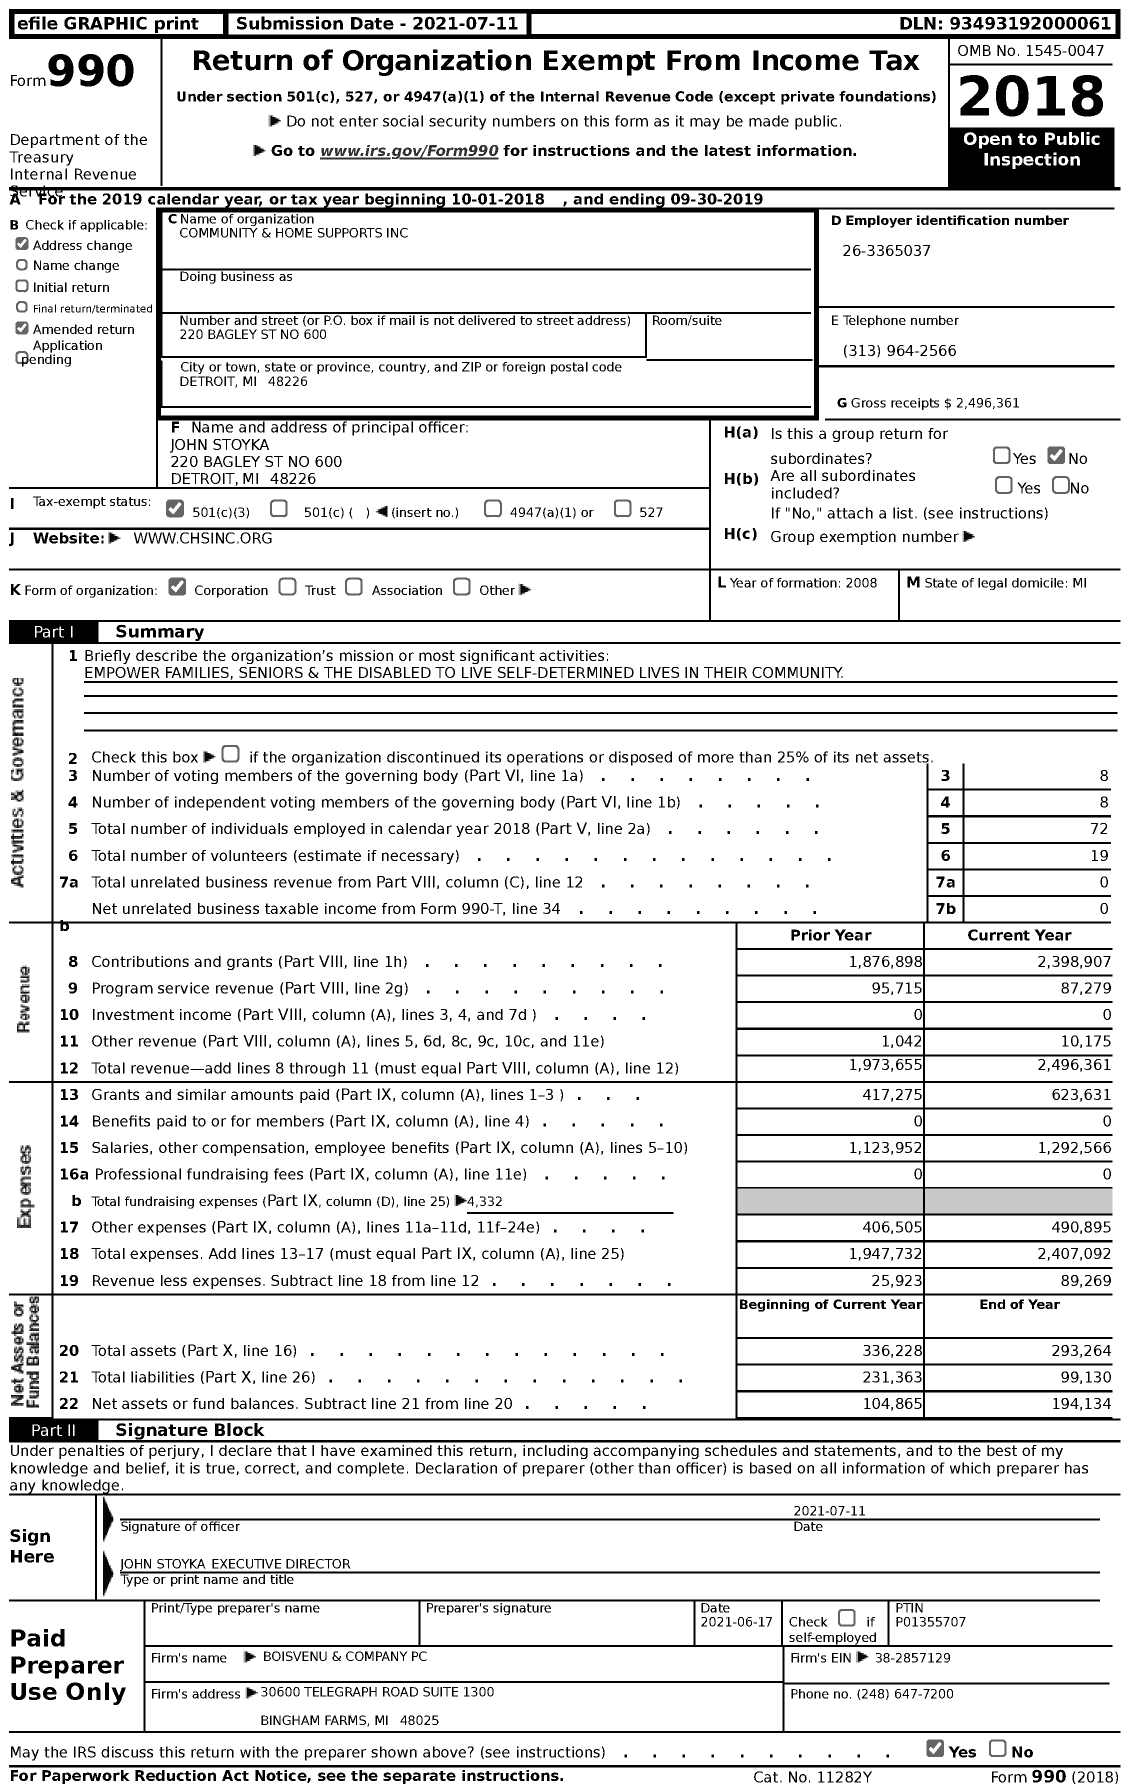 Image of first page of 2018 Form 990 for Community and Home Supports